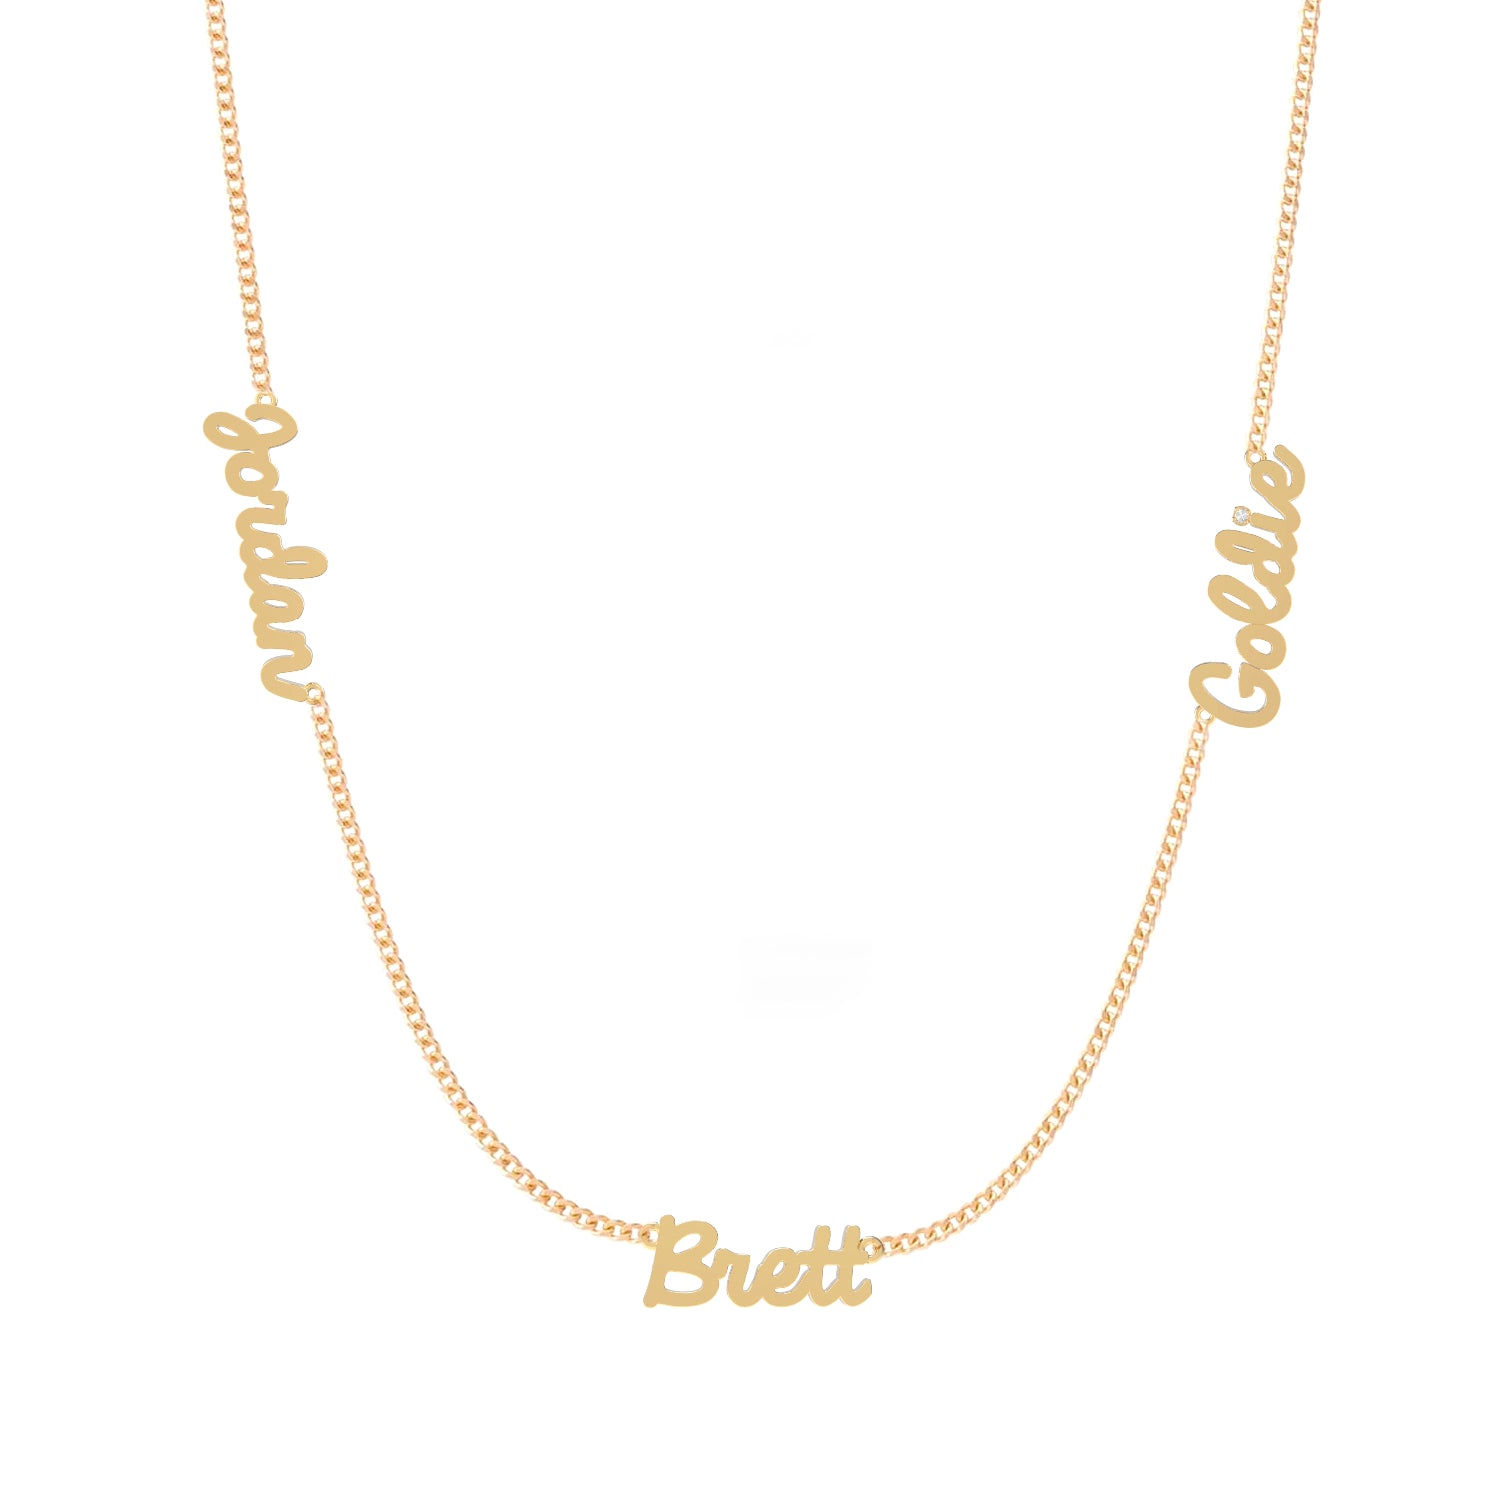 Tiny Treasures Gold Multi Name Necklace